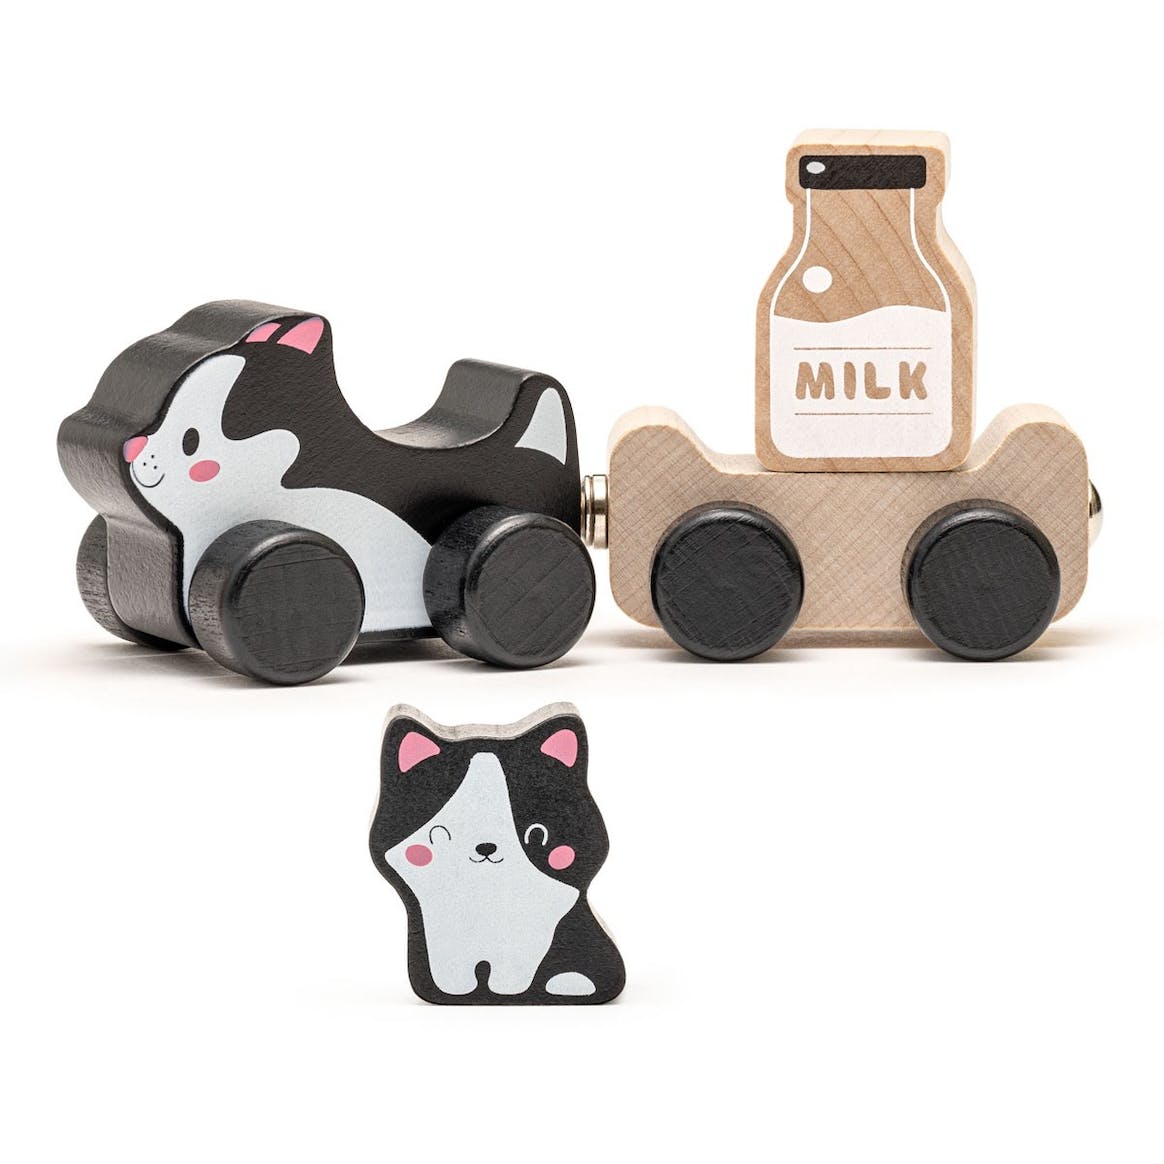 Cubika - Wooden toy "Clever Kitties" - Playlaan